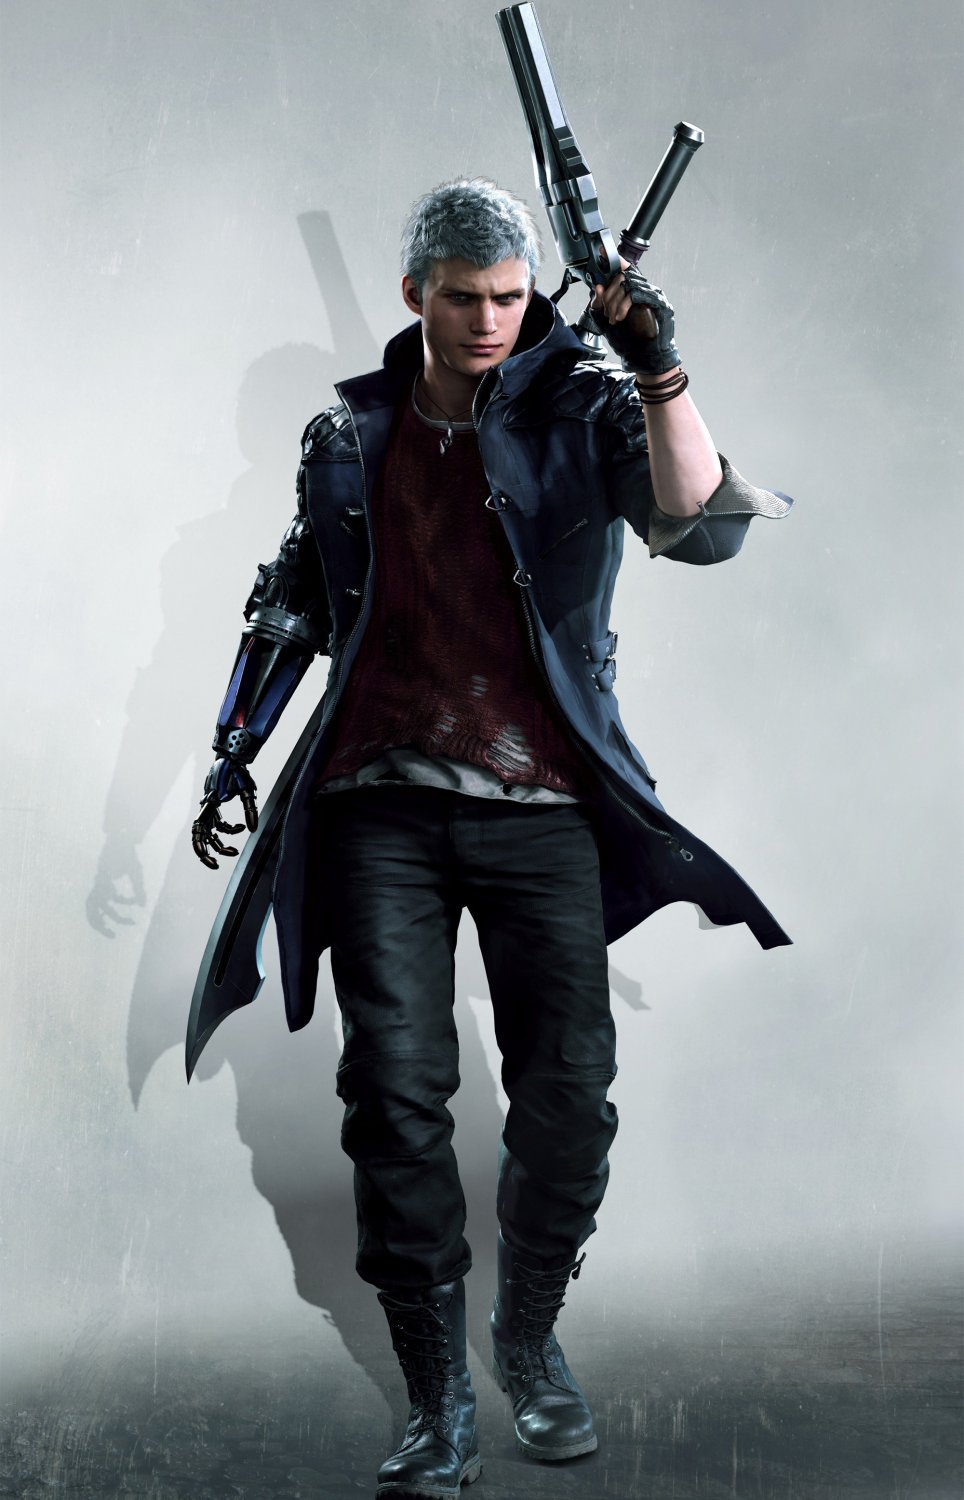 Devil May Cry 5 Game  13"x19" (32cm/49cm) Polyester Fabric Poster